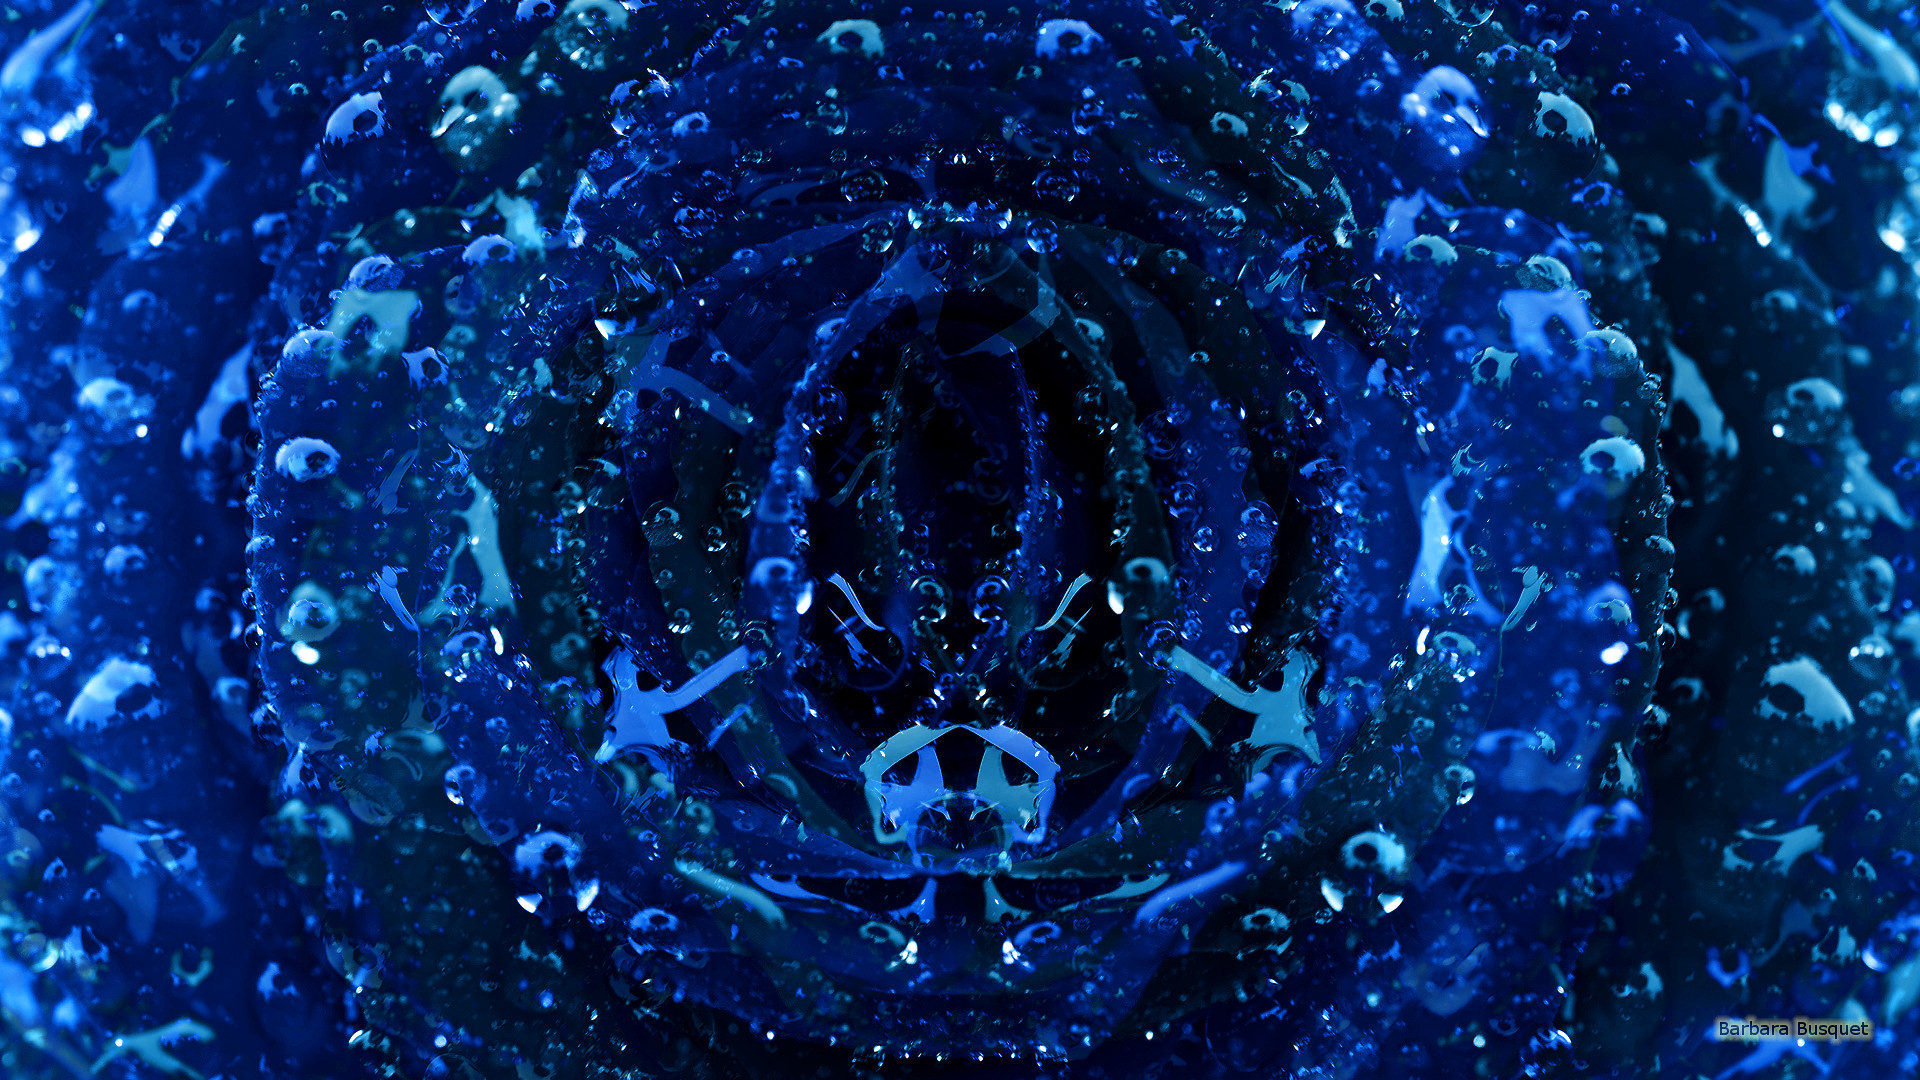 1920x1080 Dark blue abstract wallpaper with water drops.